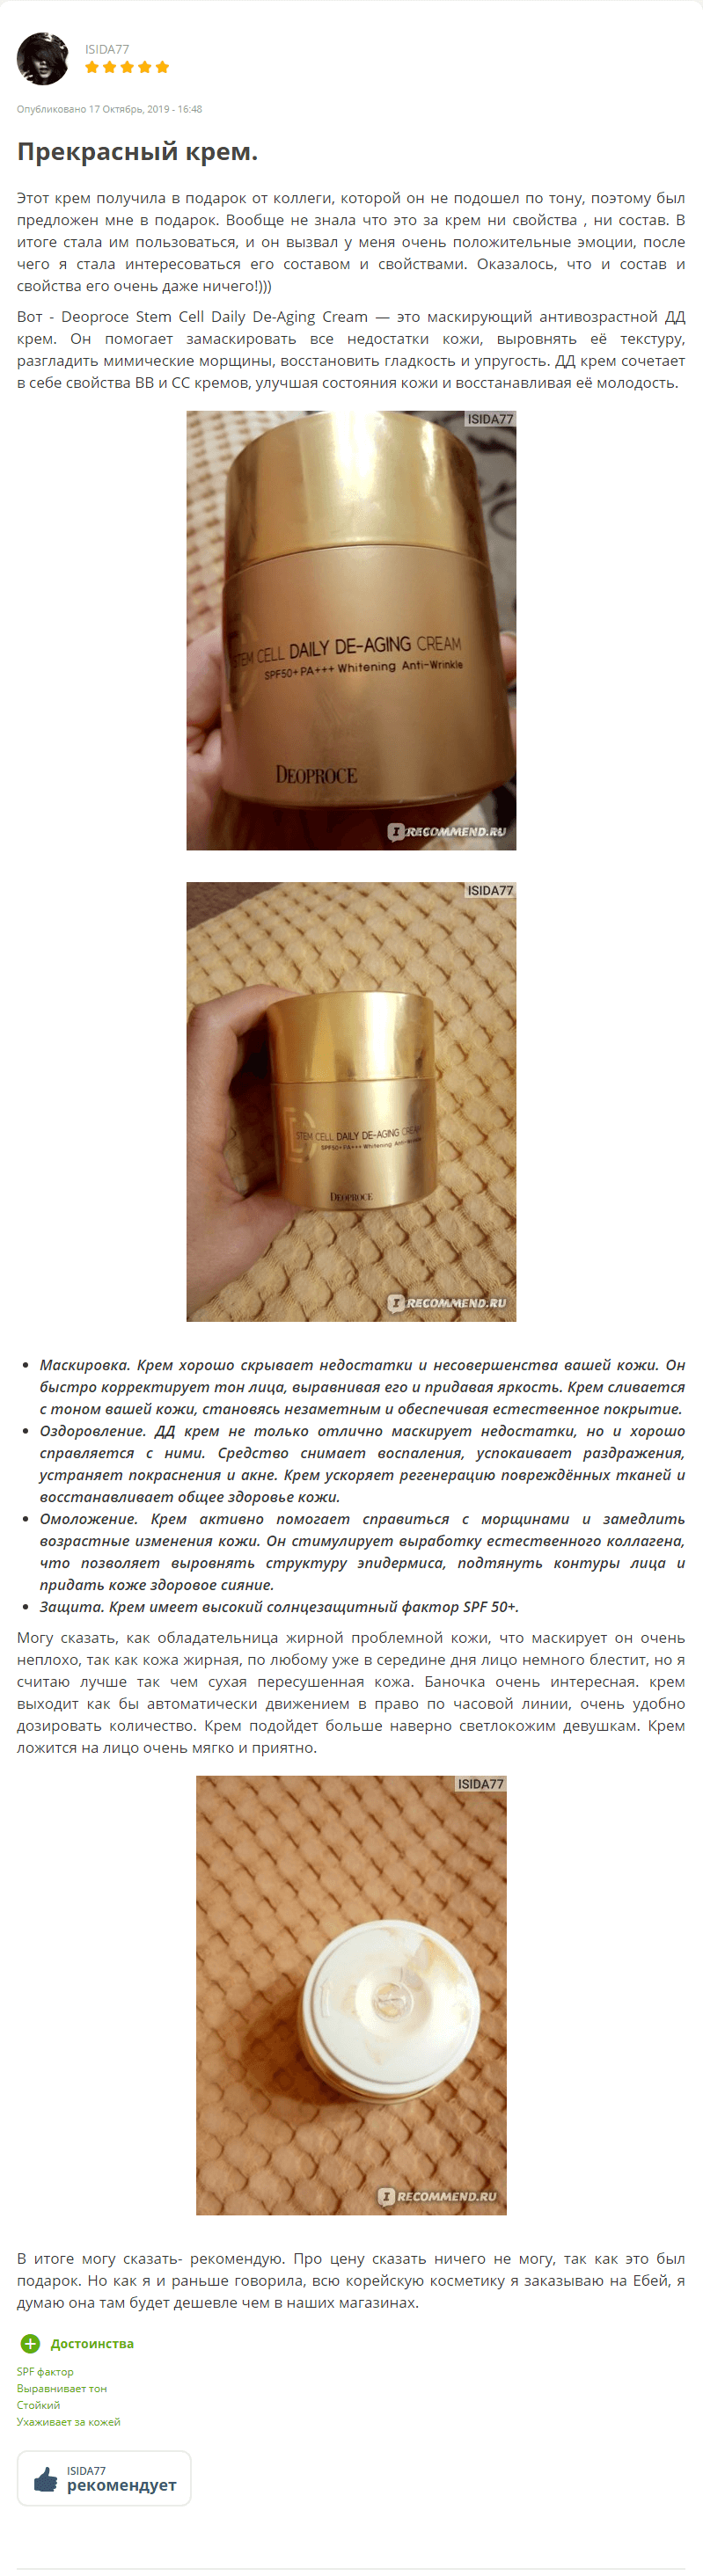 Stem Cell Daily De-Aging Cream [DEOPROCE] (1)